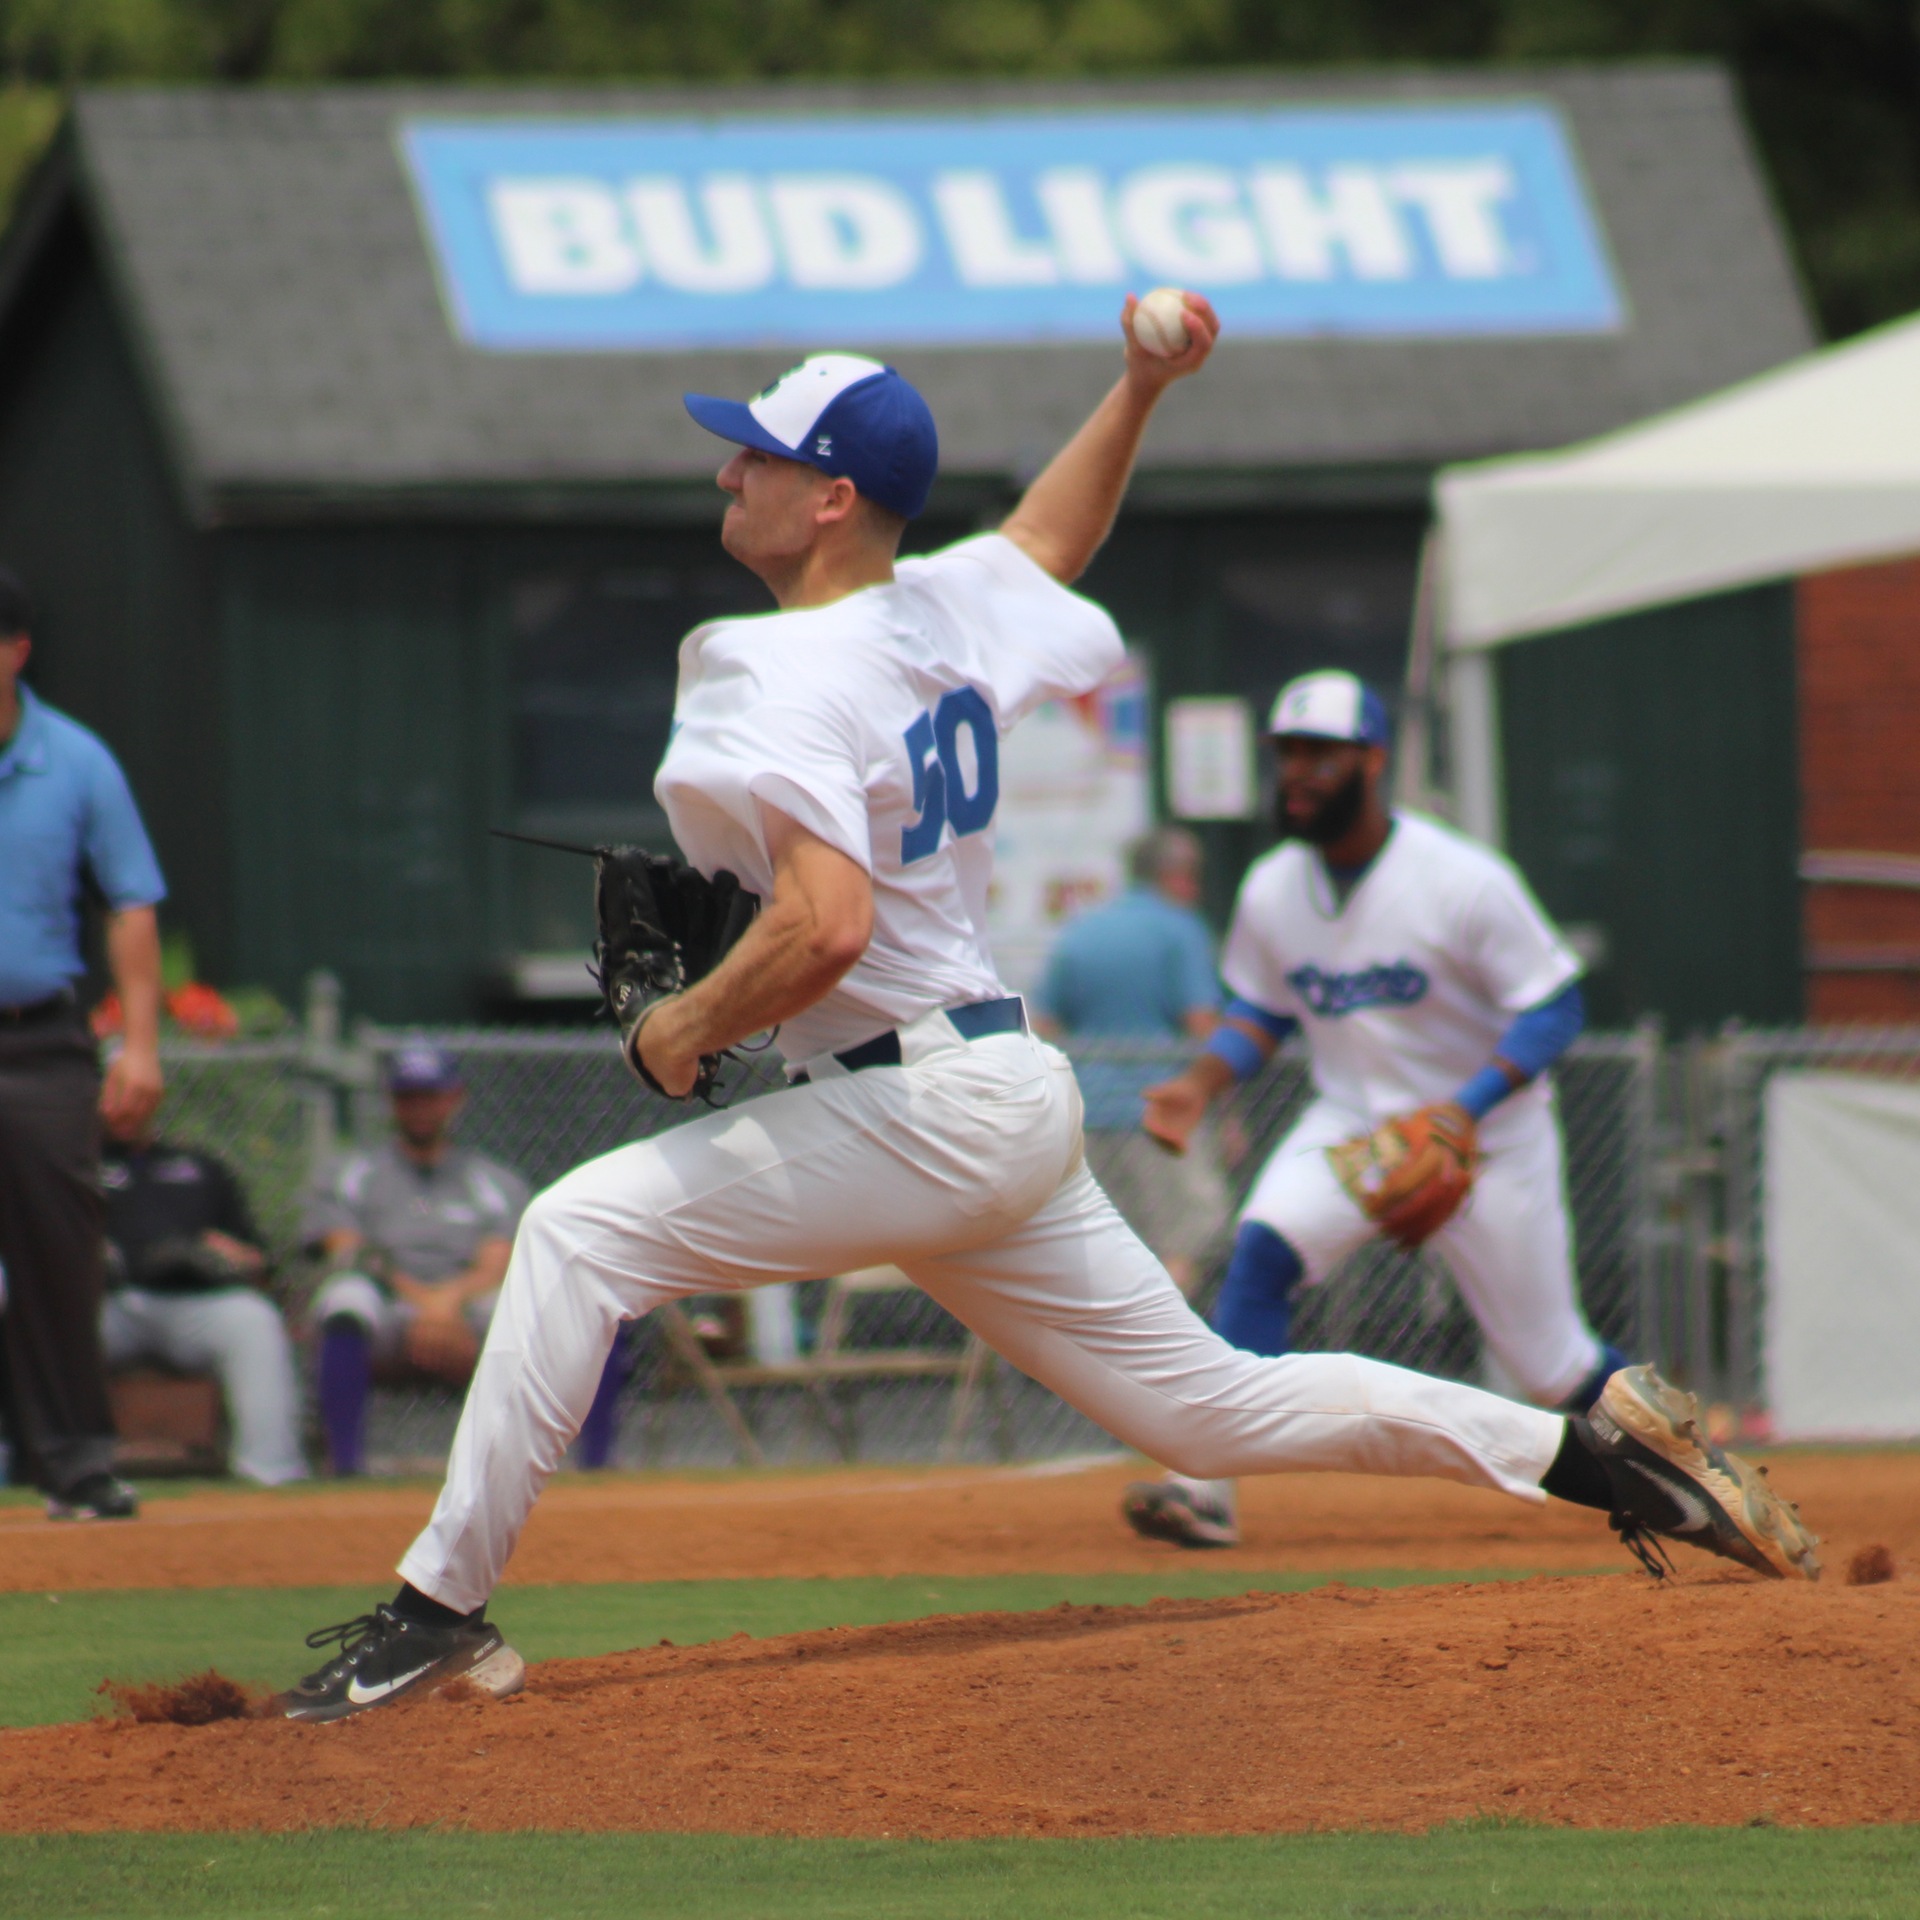 The Evansville Otters have announced that starting pitcher Tim Holdgrafer has been signed by the Kansas City Royals.